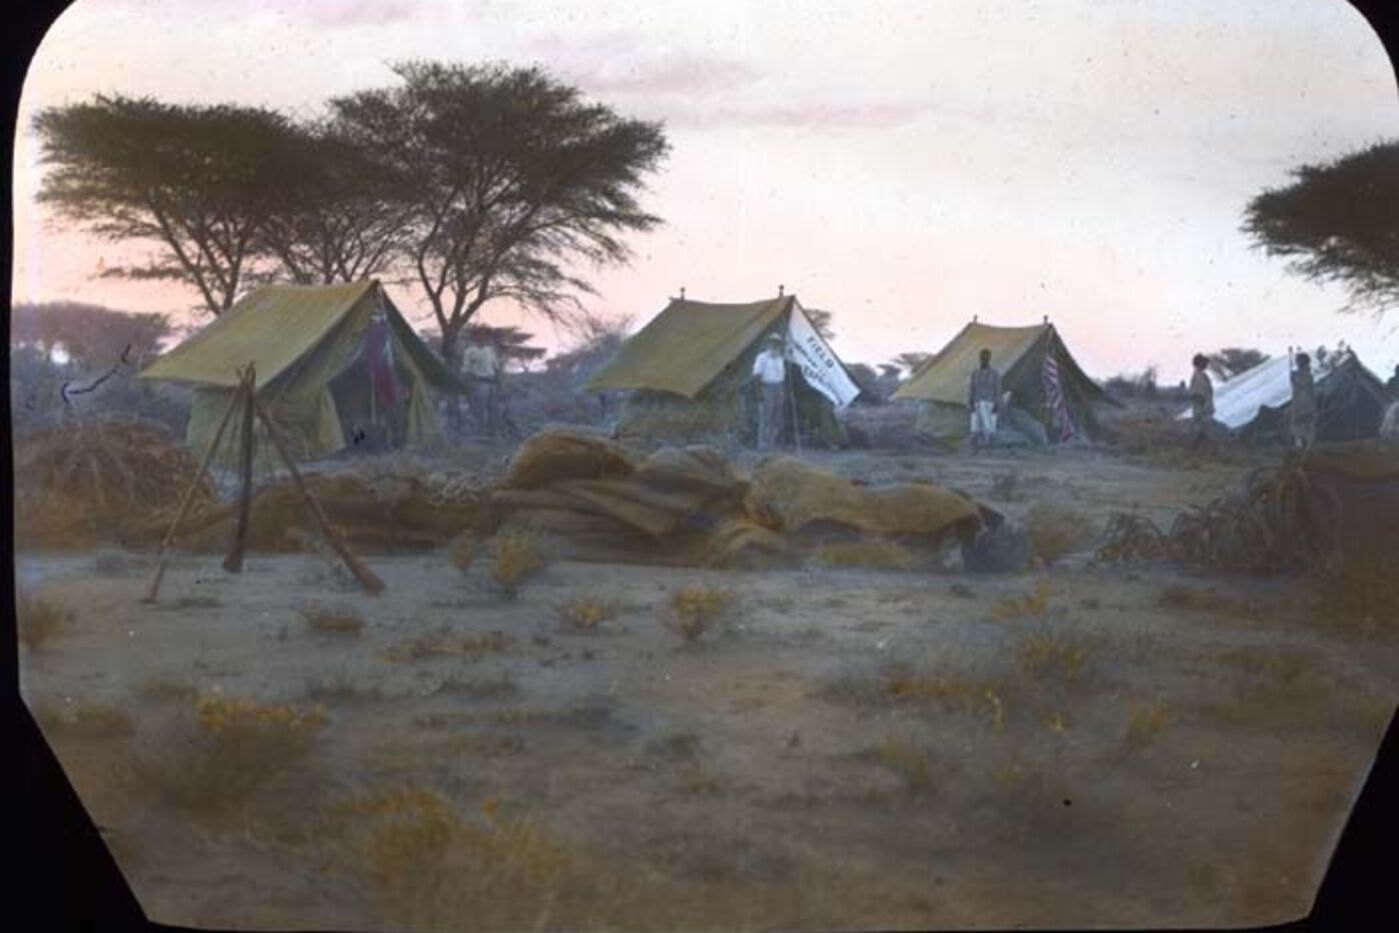 Carl Akeley's camp in Somalia, July 1896. Four tents, each with men standing nearby. Supplies piled in the foreground, trees and shrubs in the background.